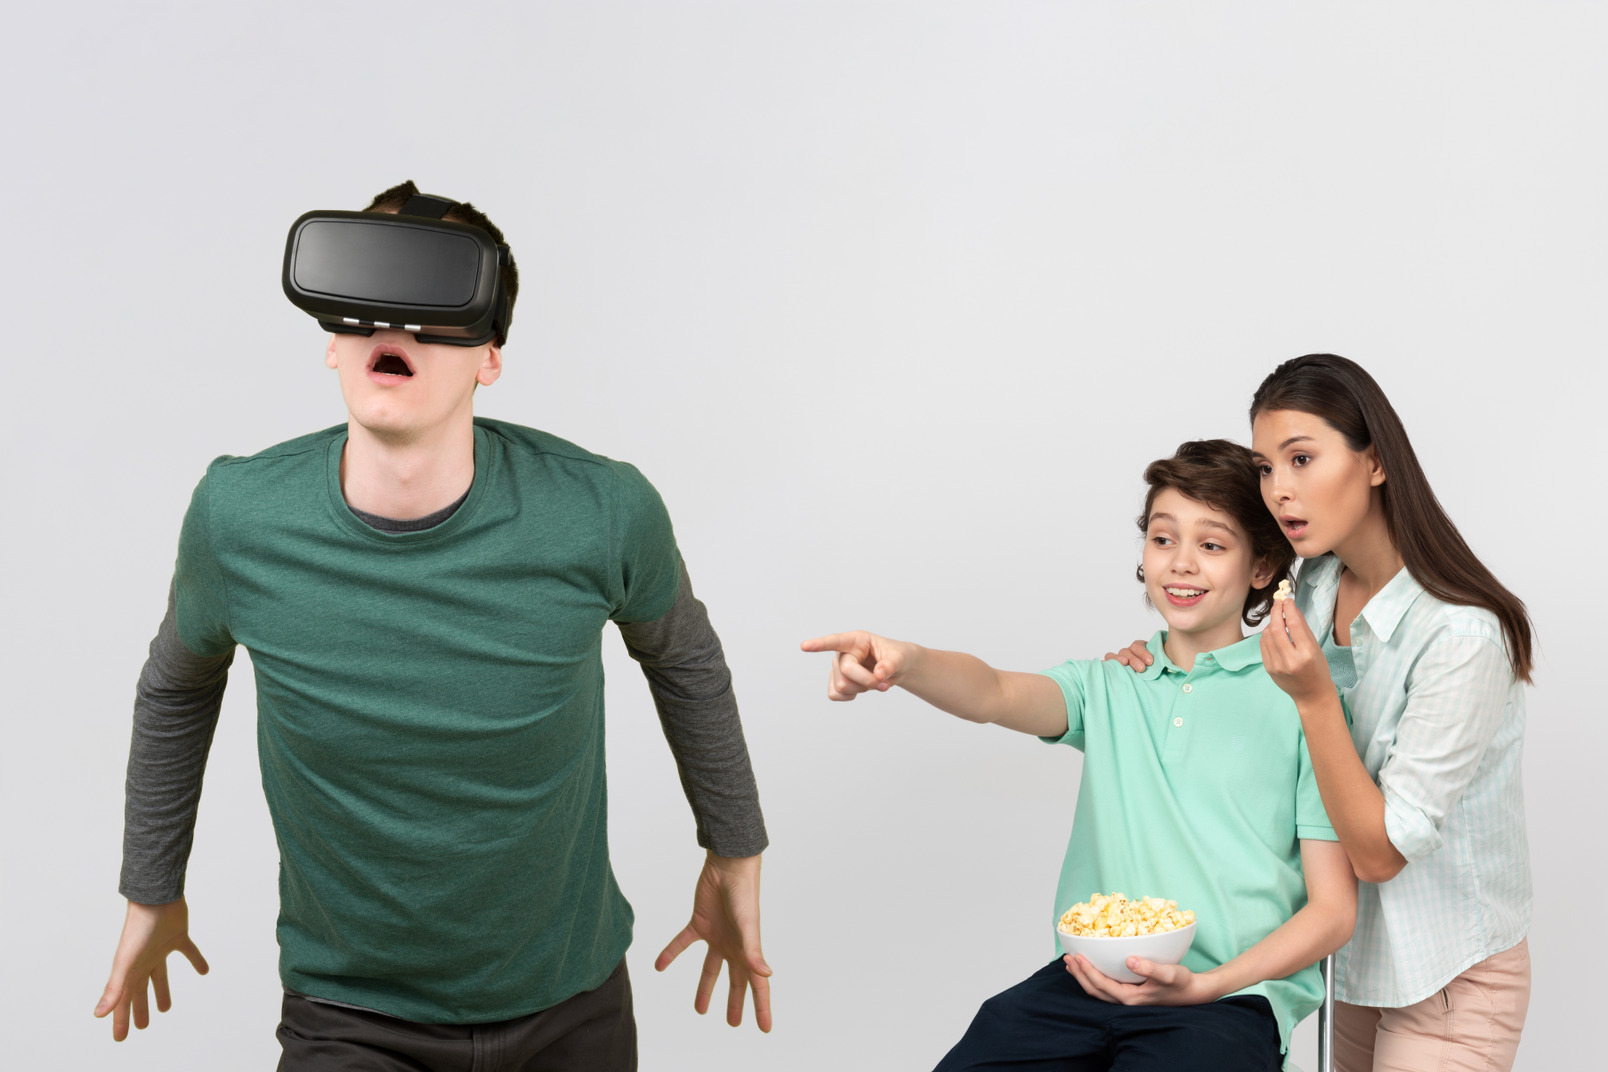 Mom, and why dad is the first one to play with vr headset?